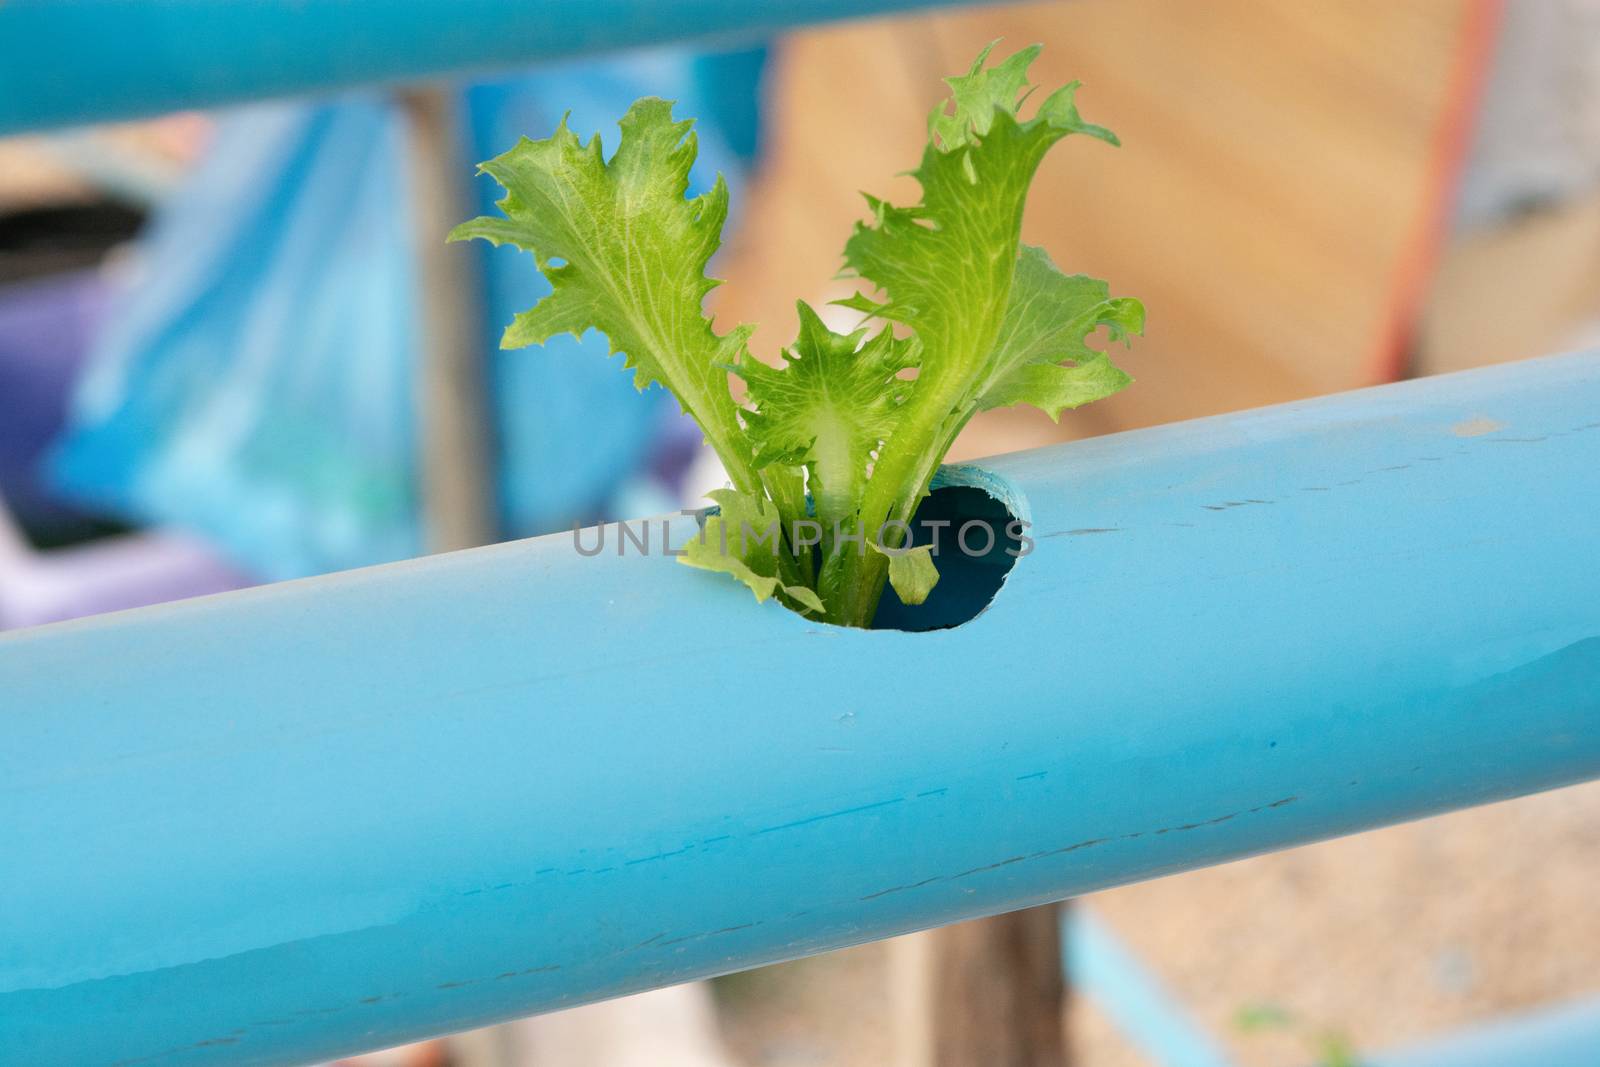 Hydroponic vegetables growing in Pvc pipe
